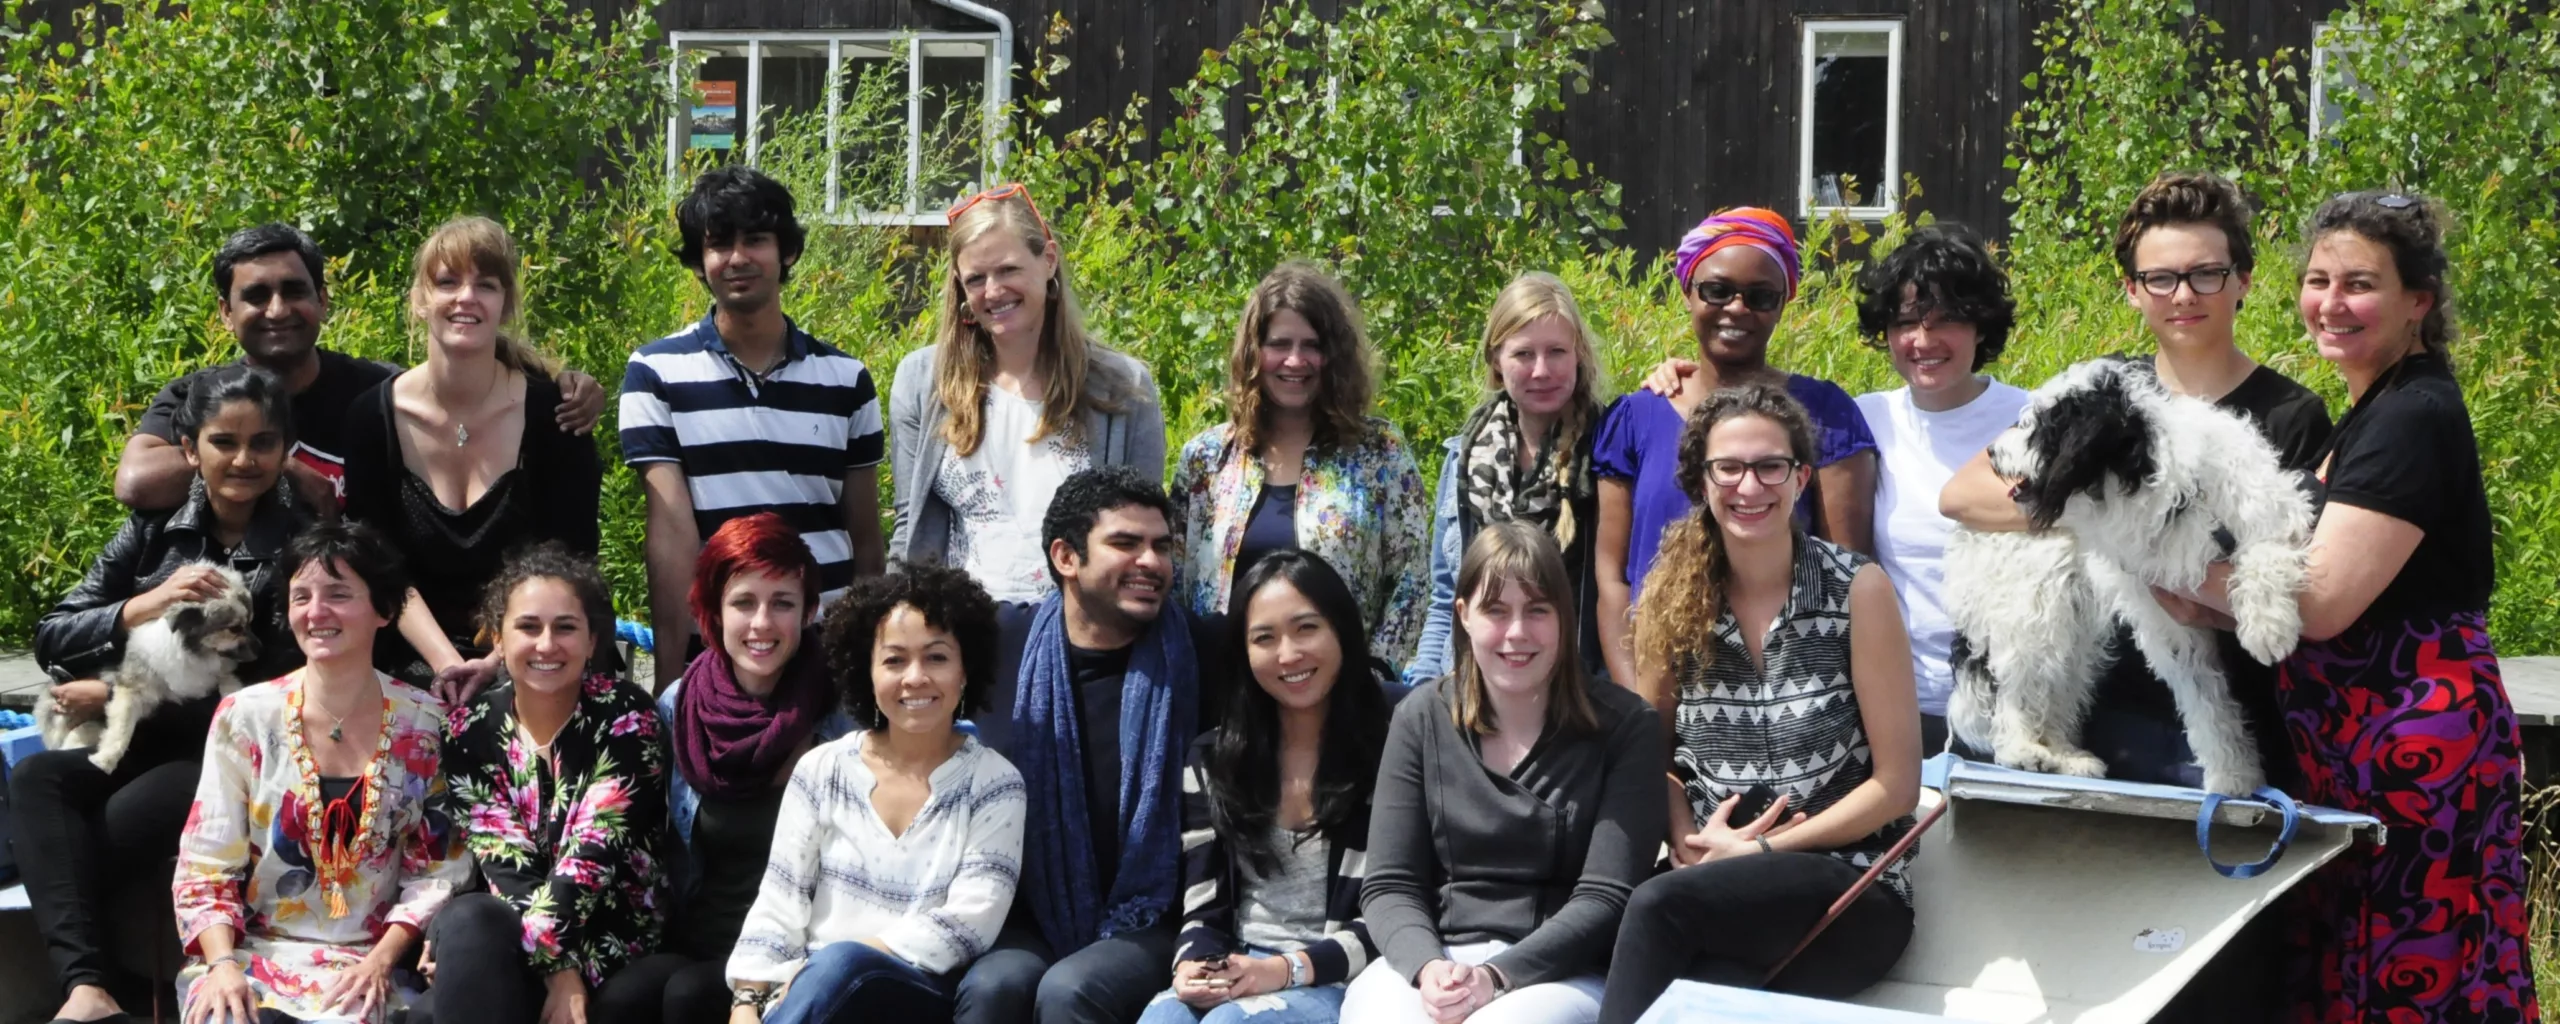 The LOVA International Summer School brings students and life–long learners in touch with new anthropological perspectives on gender studies and a network of gender scholars.